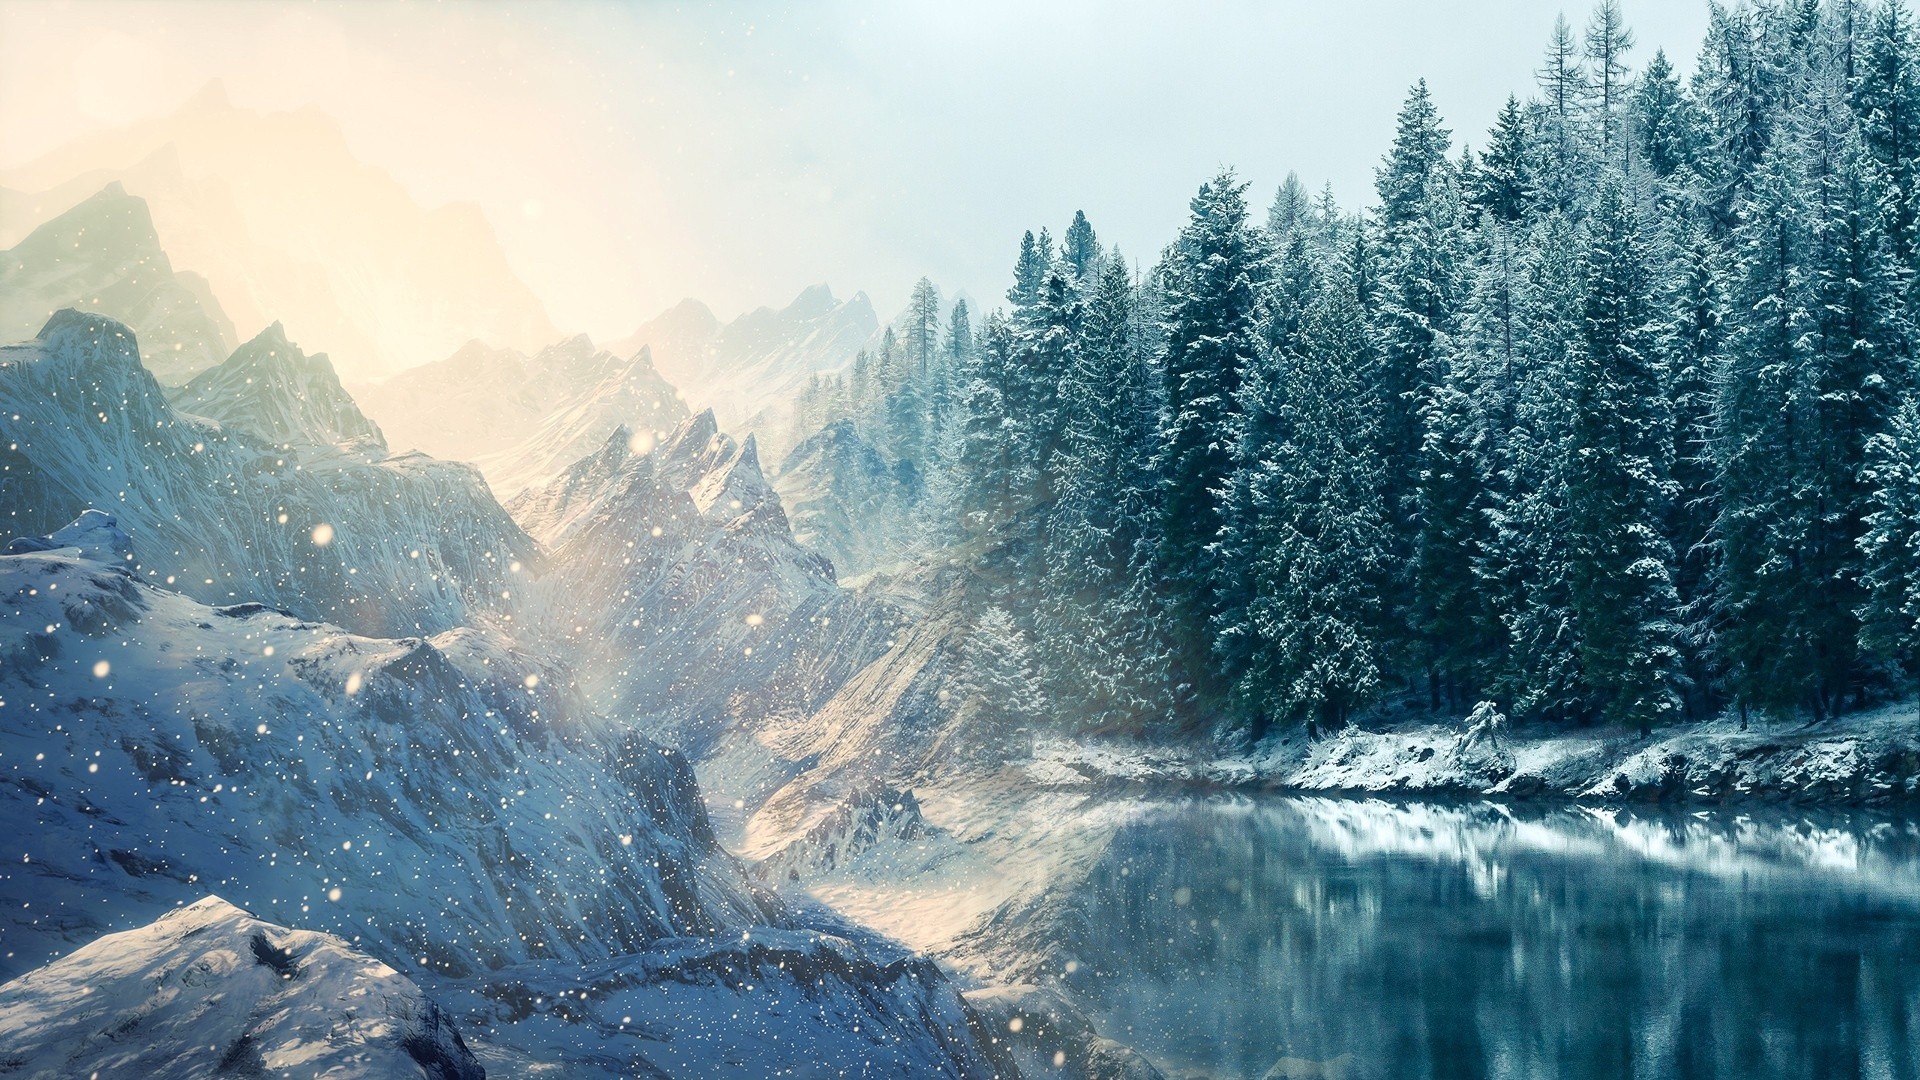 General 1920x1080 nature snow lake trees winter mountains landscape